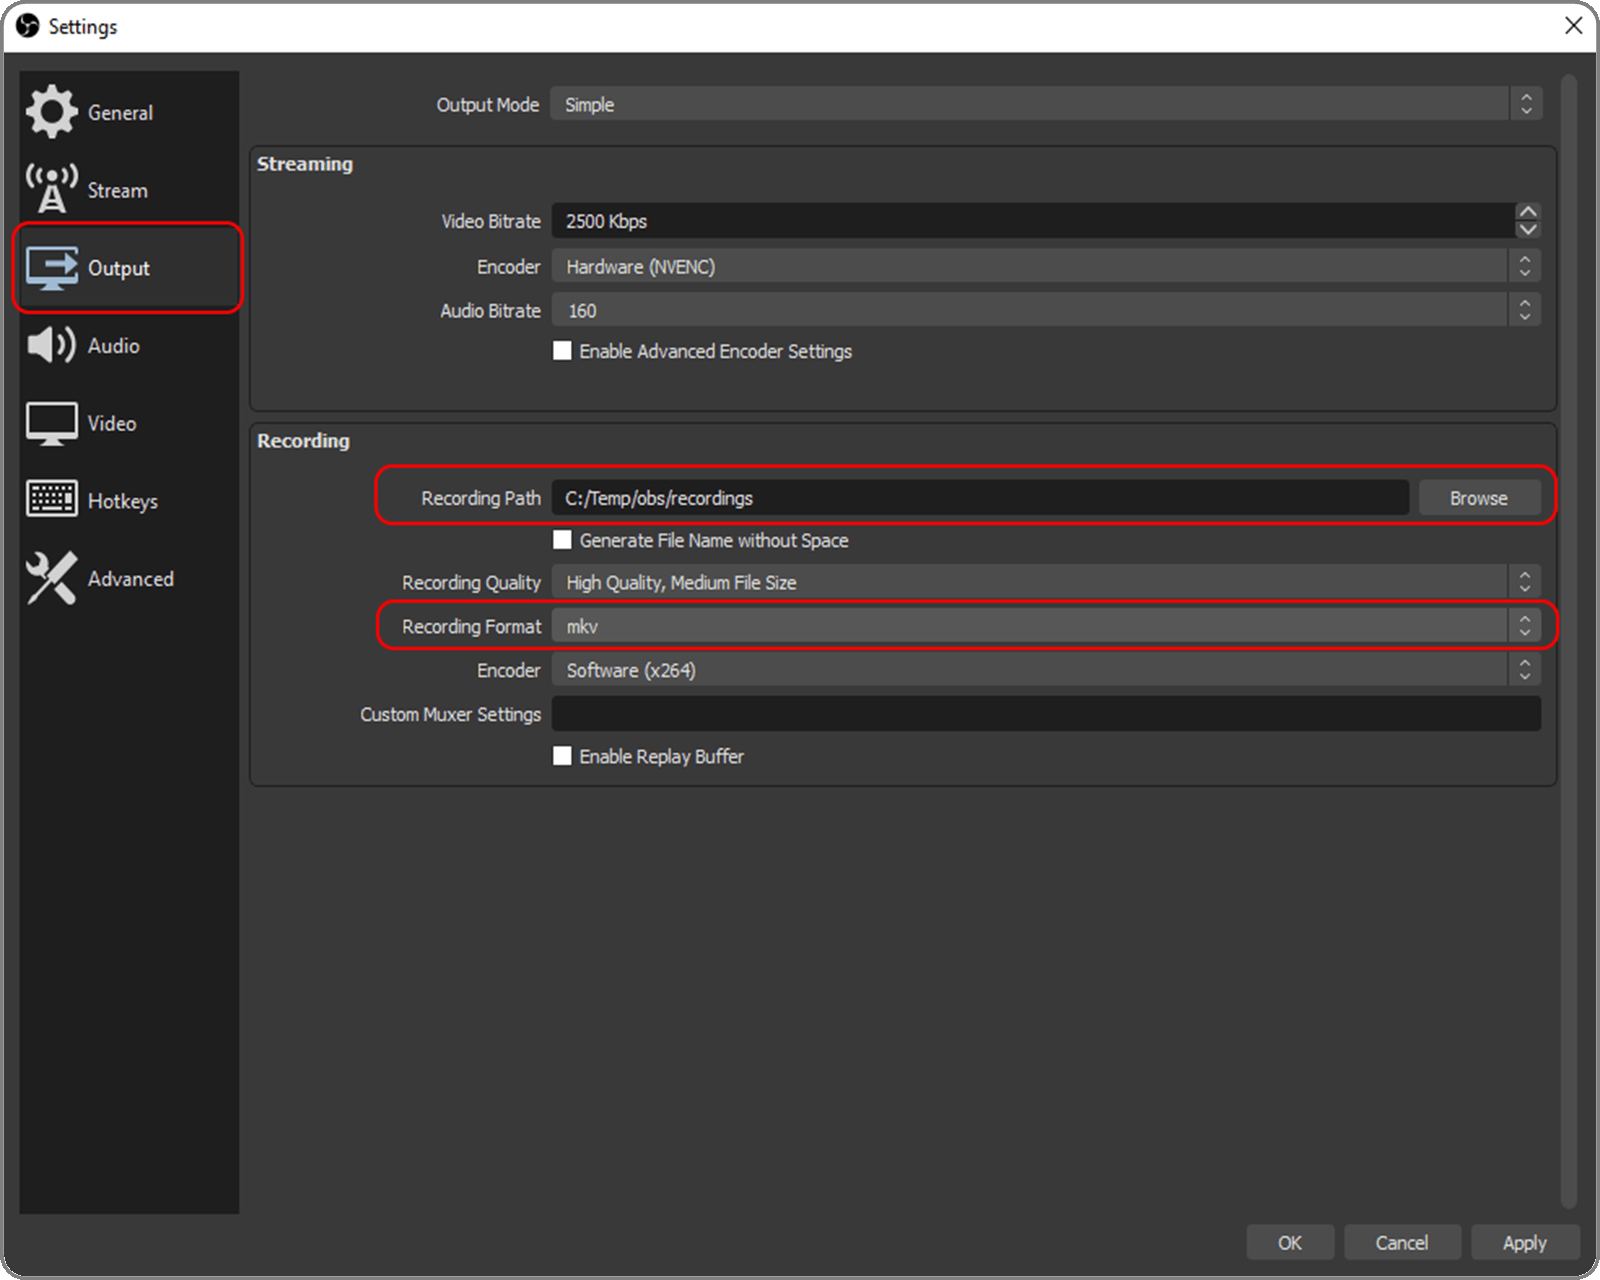 obs_03_settings_output.png